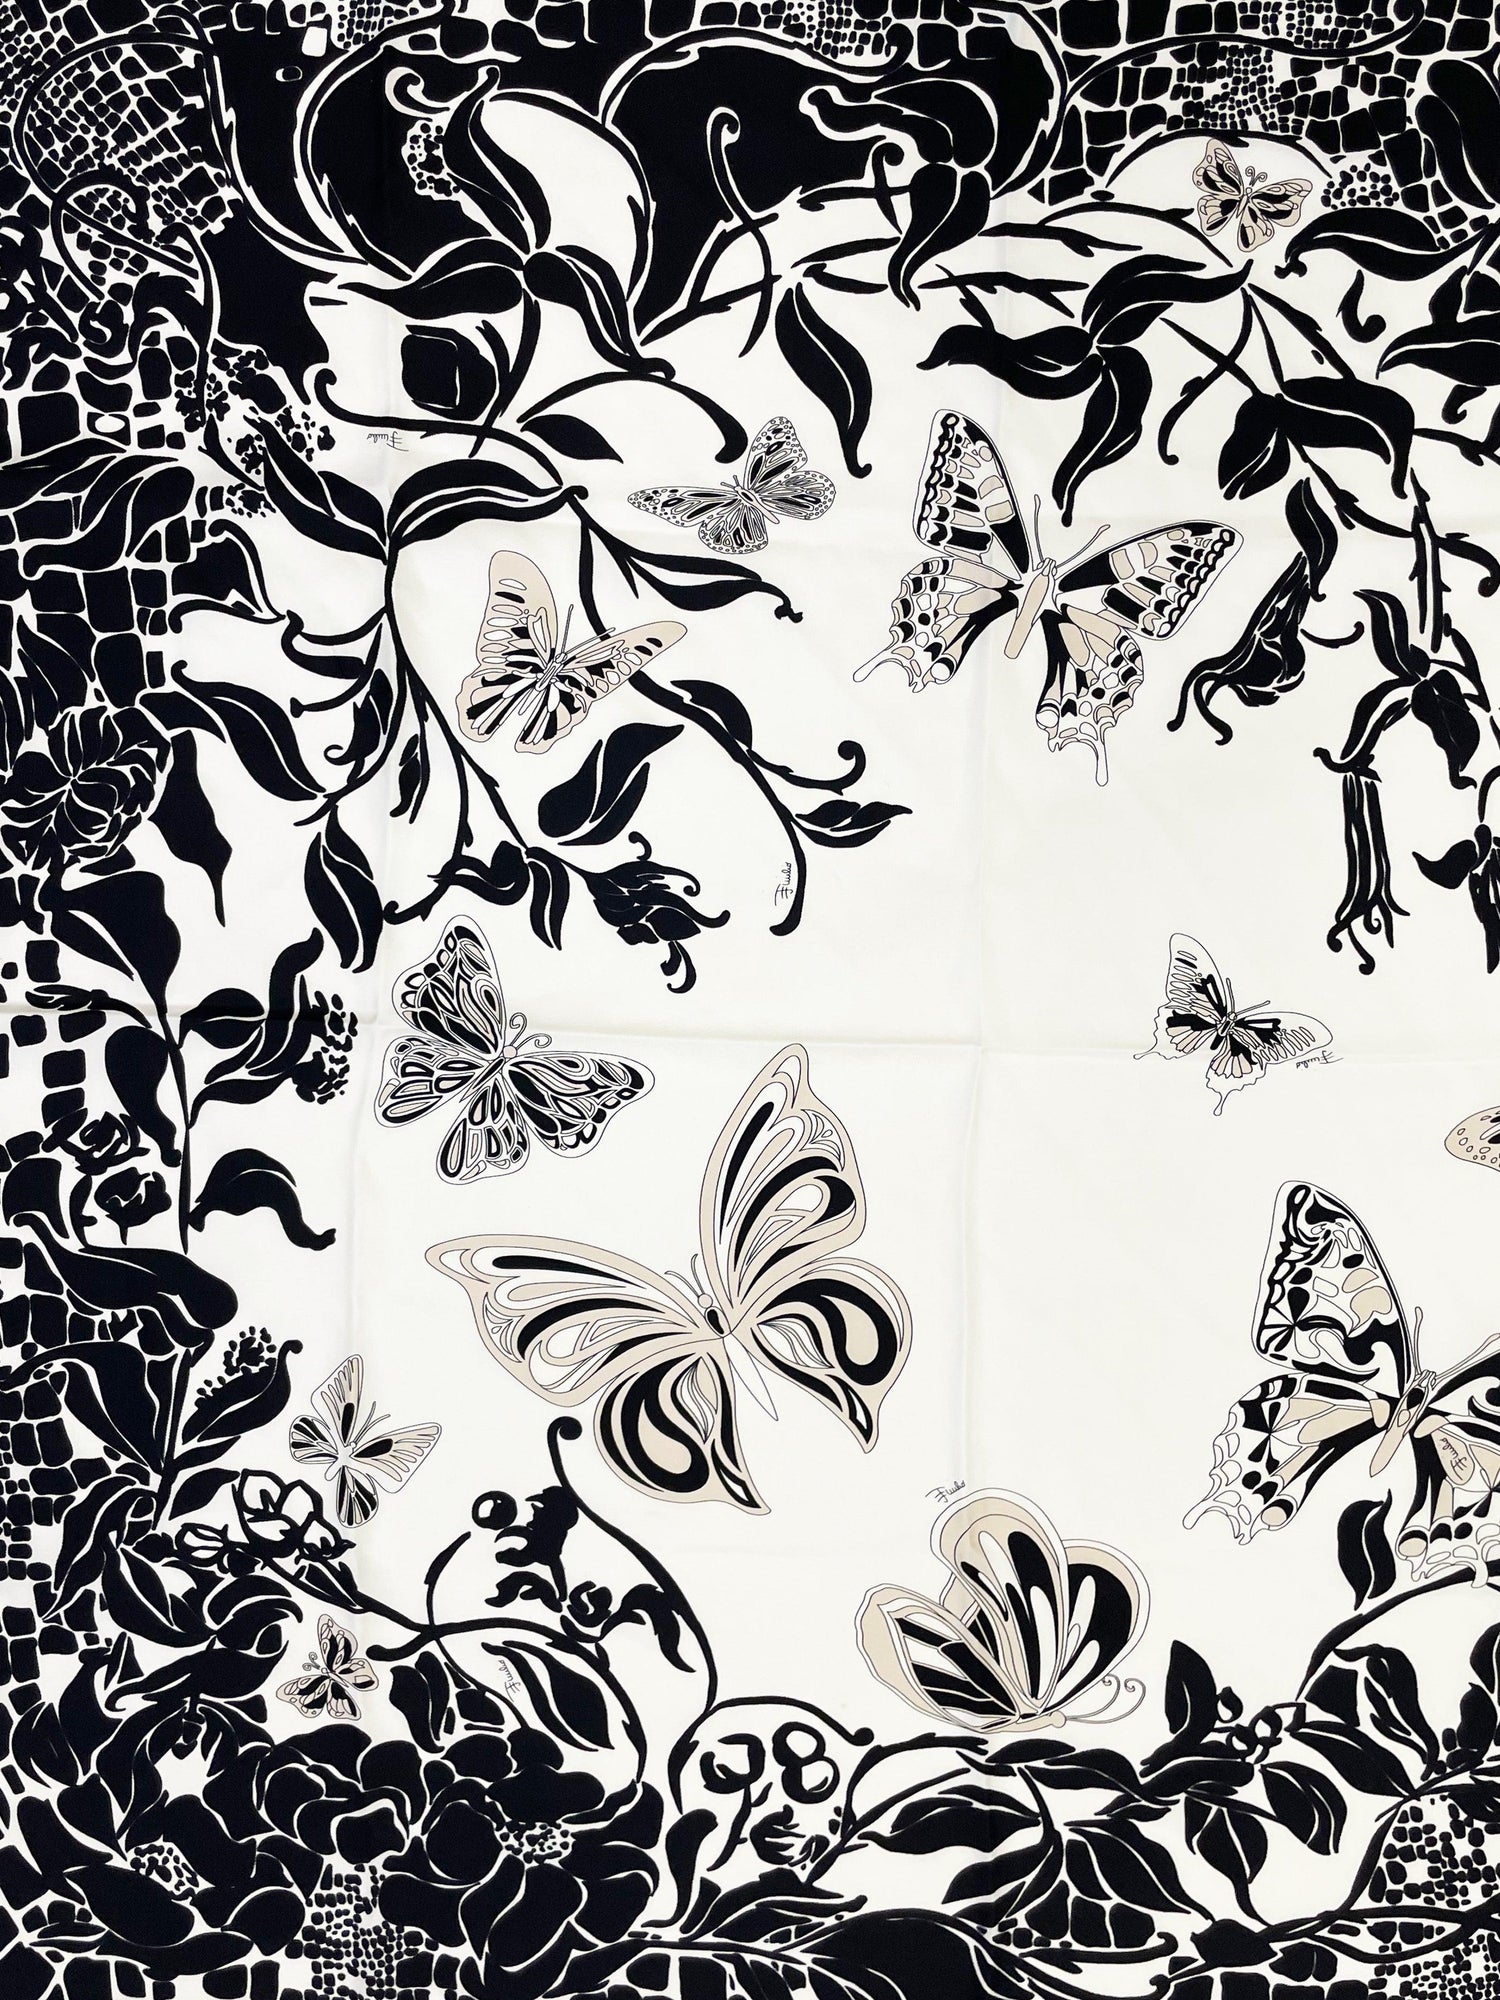 Emilio Pucci Black and White Butterfly Silk Scarf